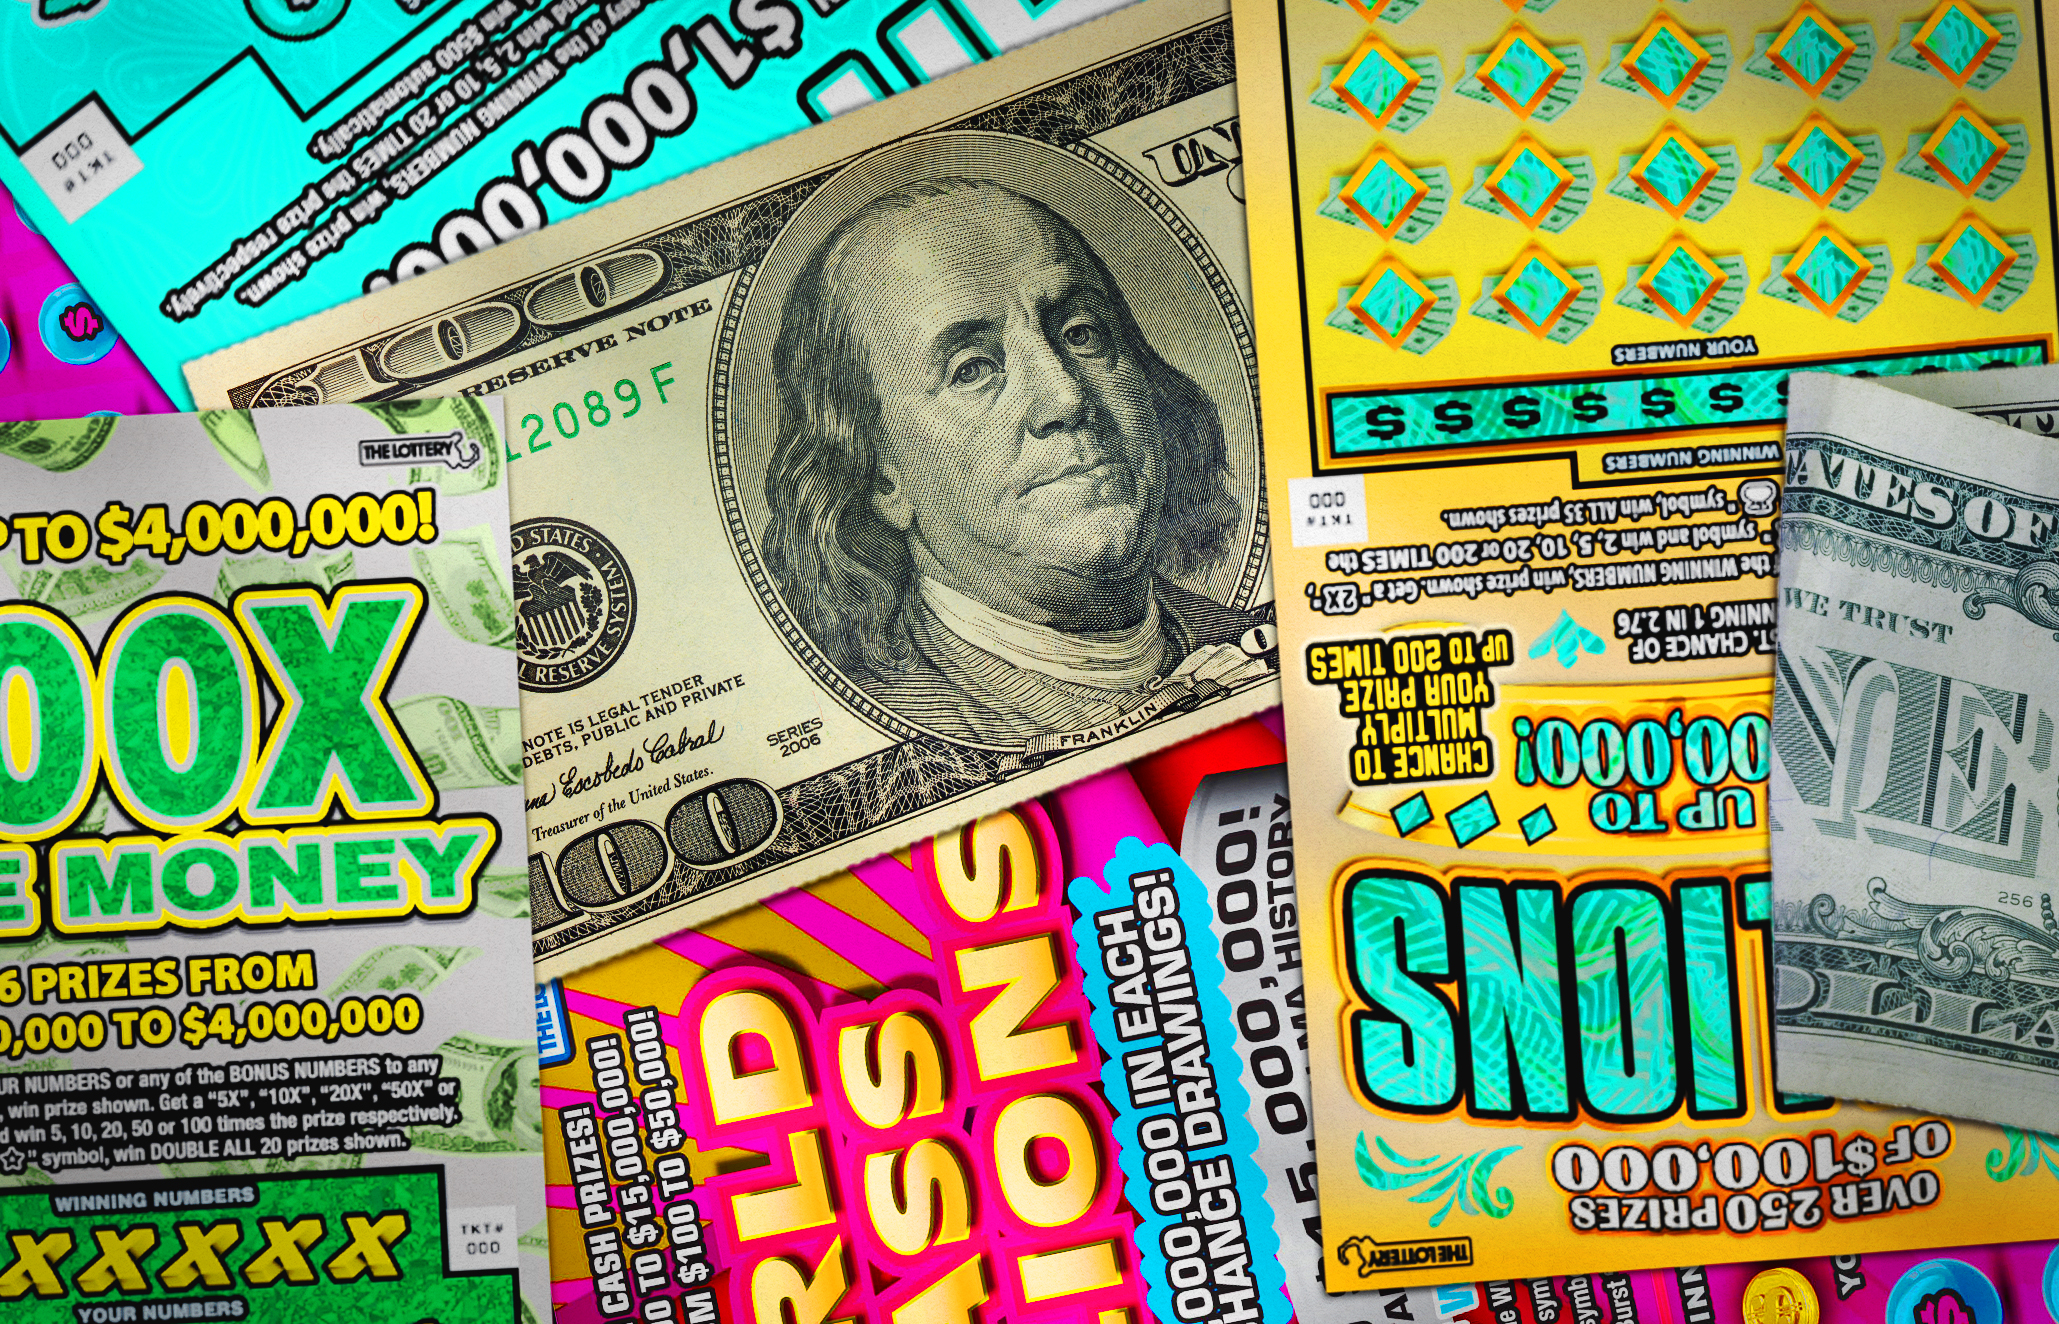 People who mistakenly won lottery allowed to keep the money